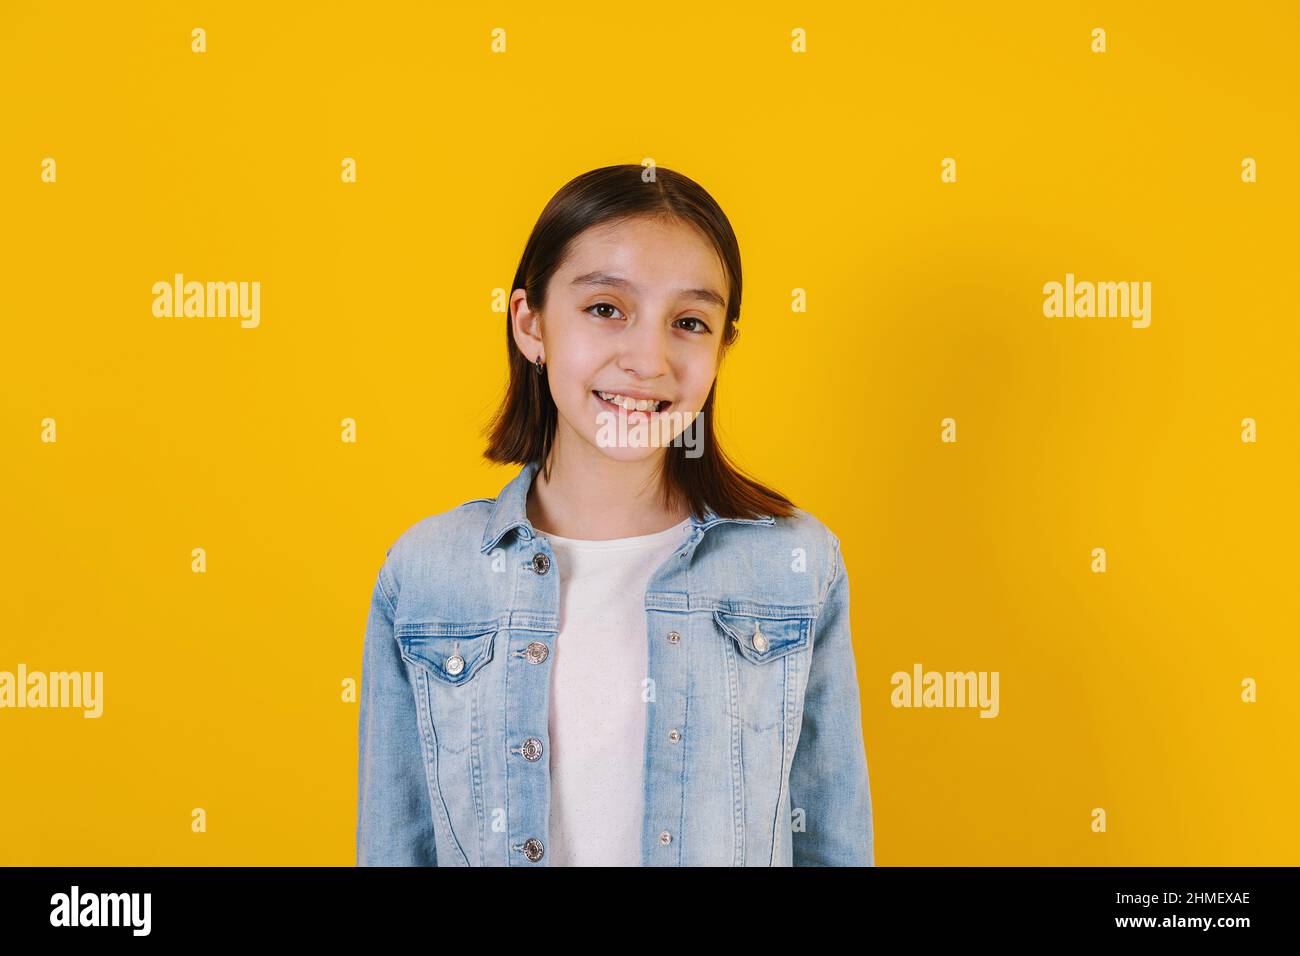 Portrait of latin child girl on yellow background in Mexico Latin America Stock Photo